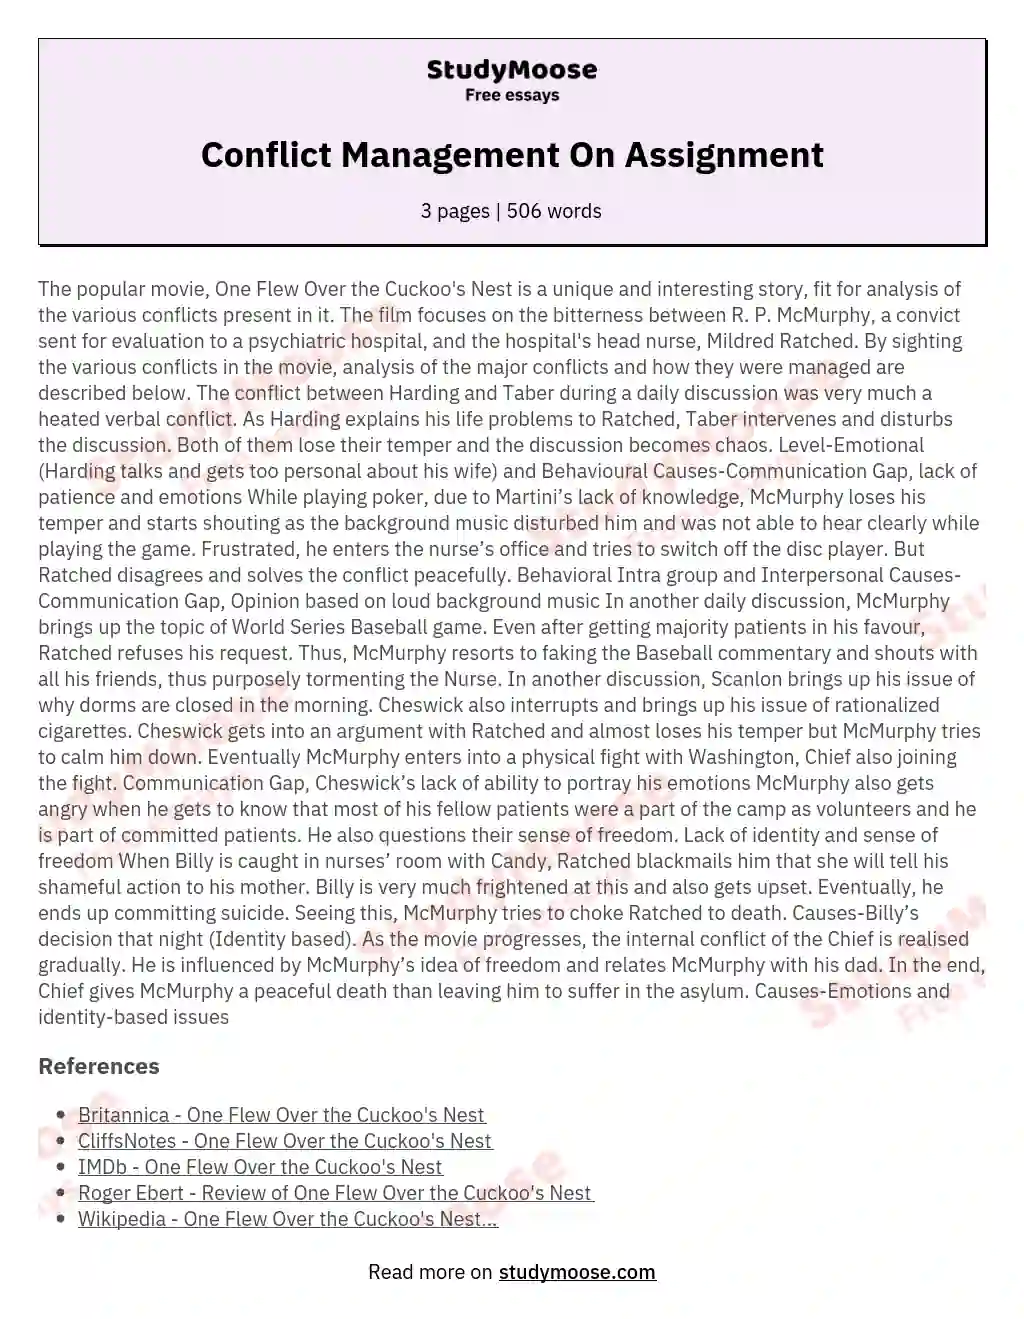 Conflict Management On Assignment essay